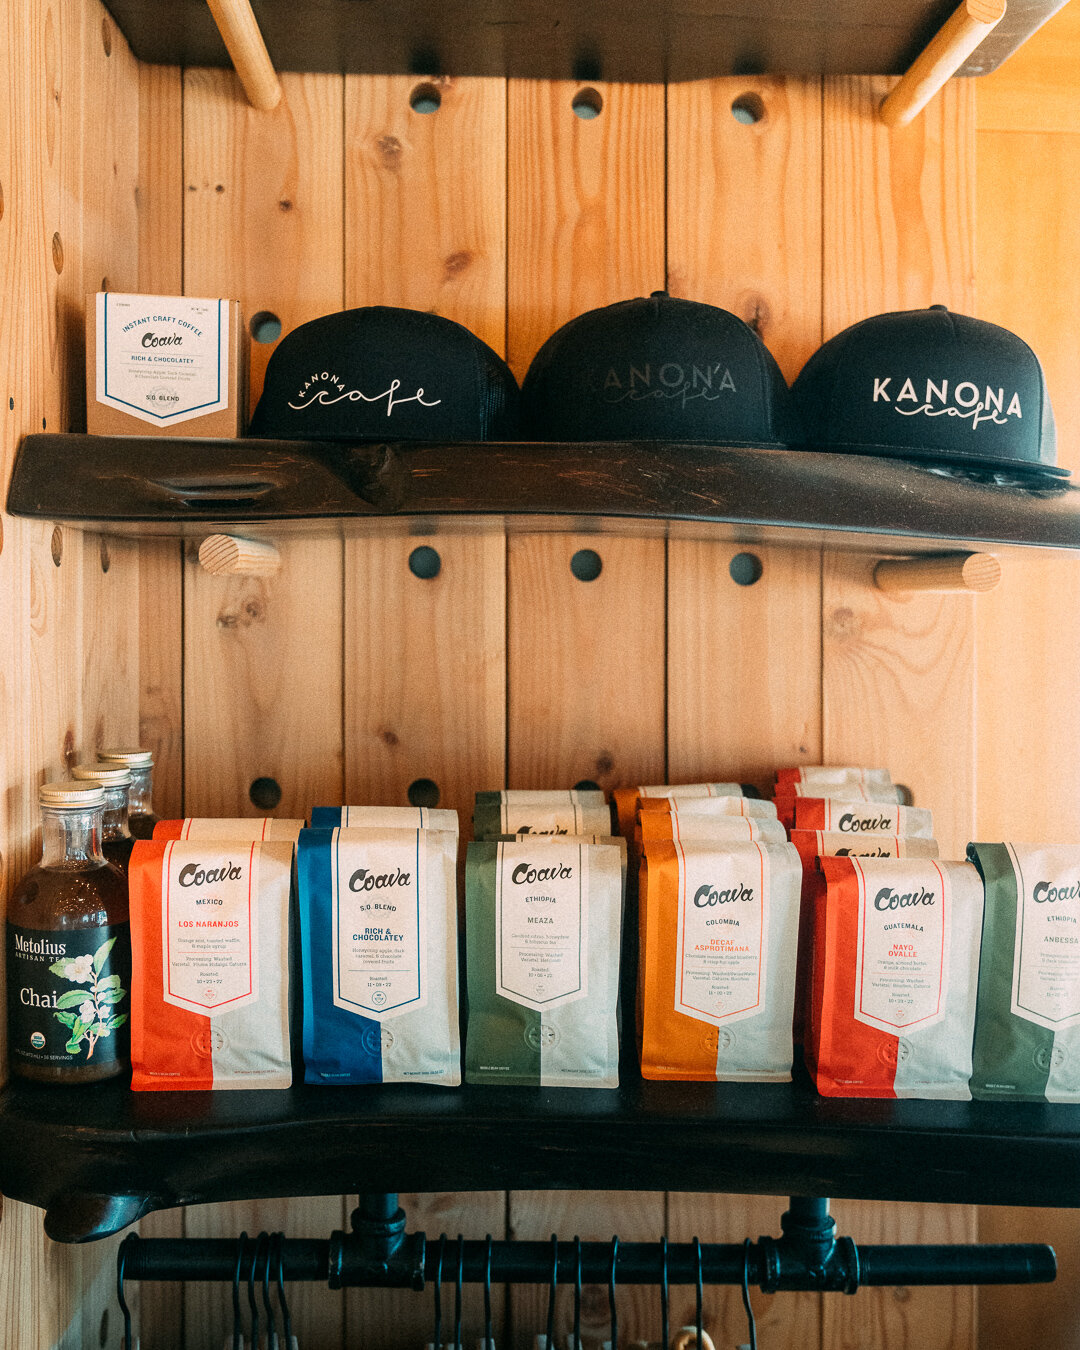 Holiday shopping? We've got you covered 🤙
.
.
.
 #fuelyourself #craftcoffee #cleanfood #kanonacafe